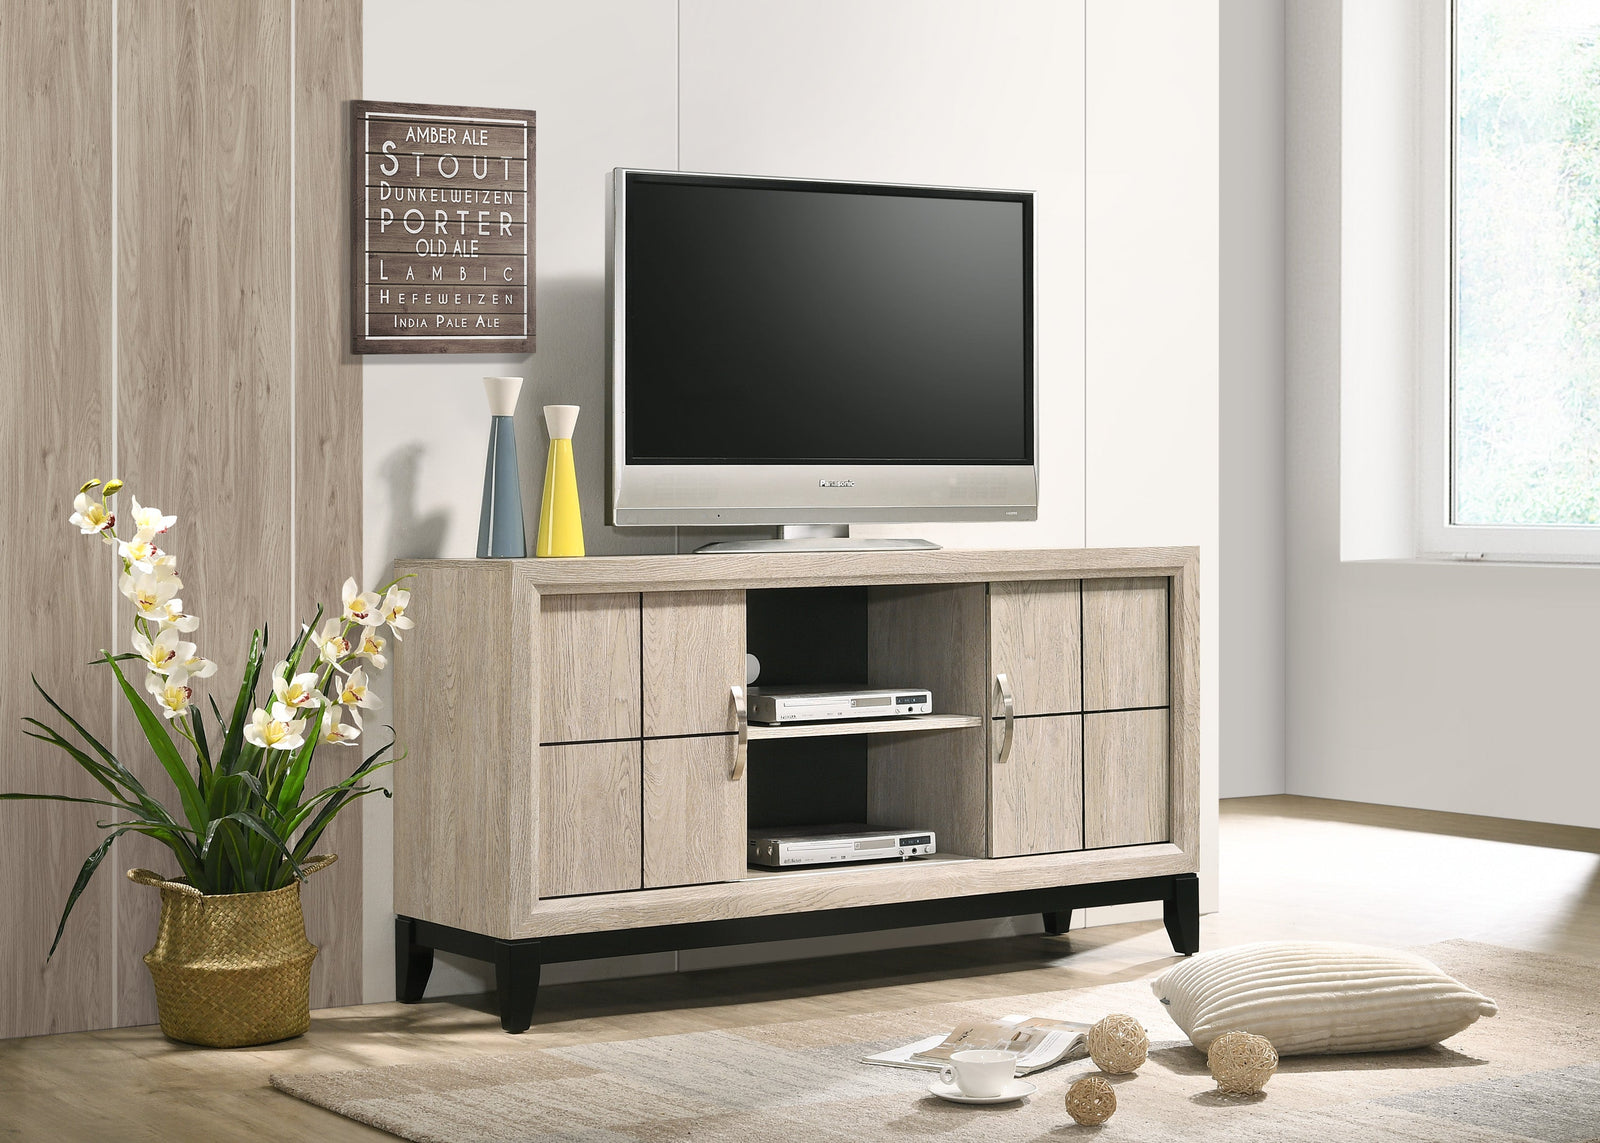 Akerson Cream Tv Stand Drift Wood, Driftwood Entertainment Console With Metal Legs With Storage Doors for Living Room